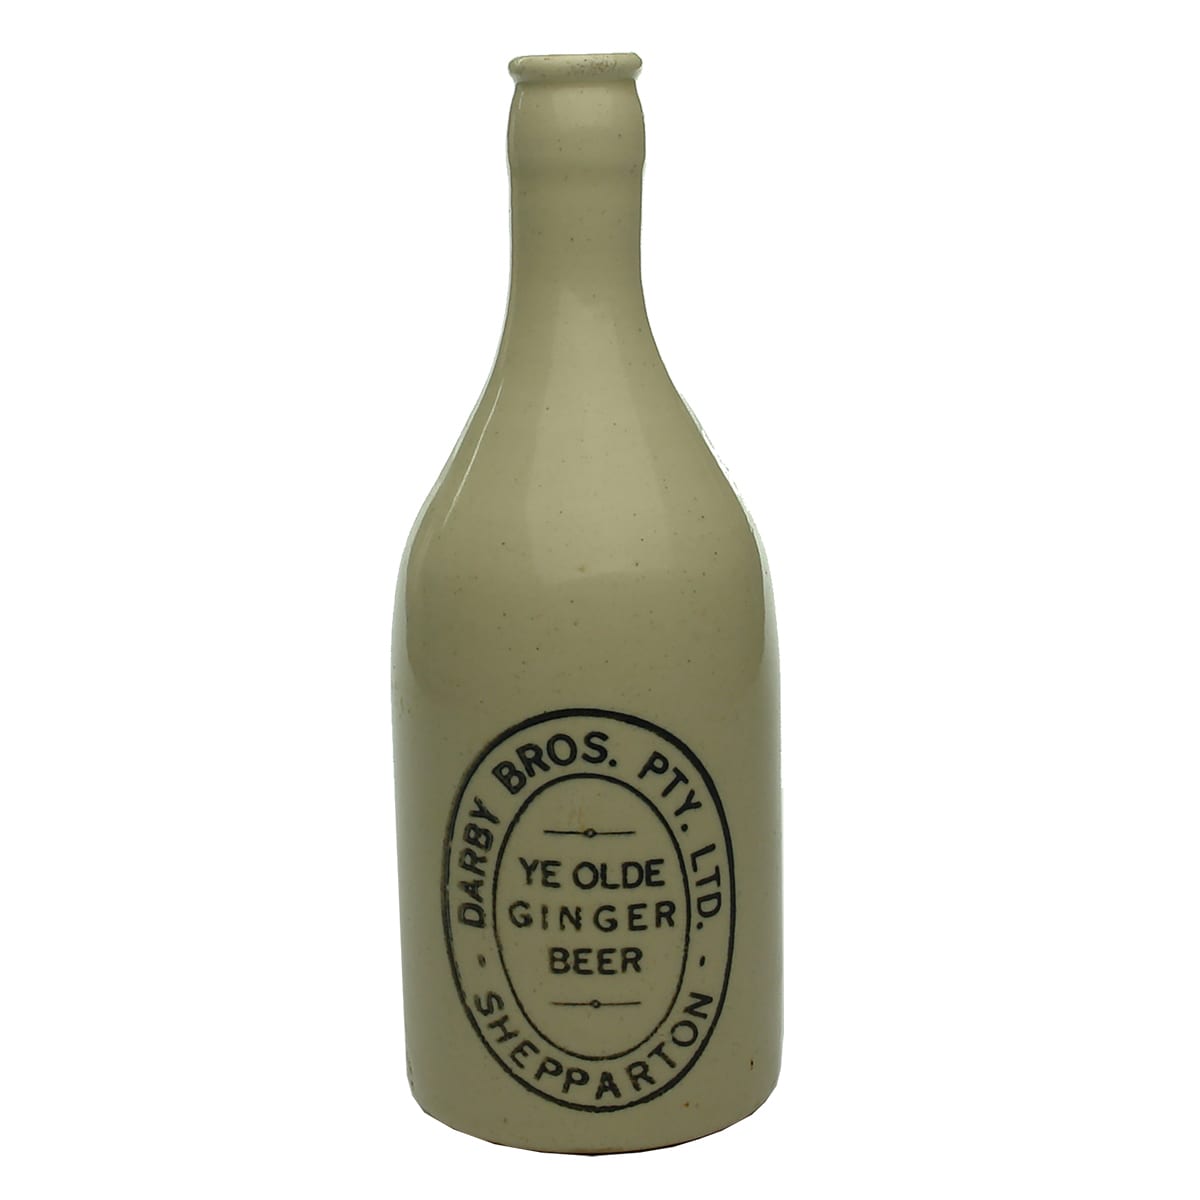 Ginger Beer. Darby Bros. Pty. Ltd., Shepparton. Crown Seal. All White. 10 oz. (Victoria)